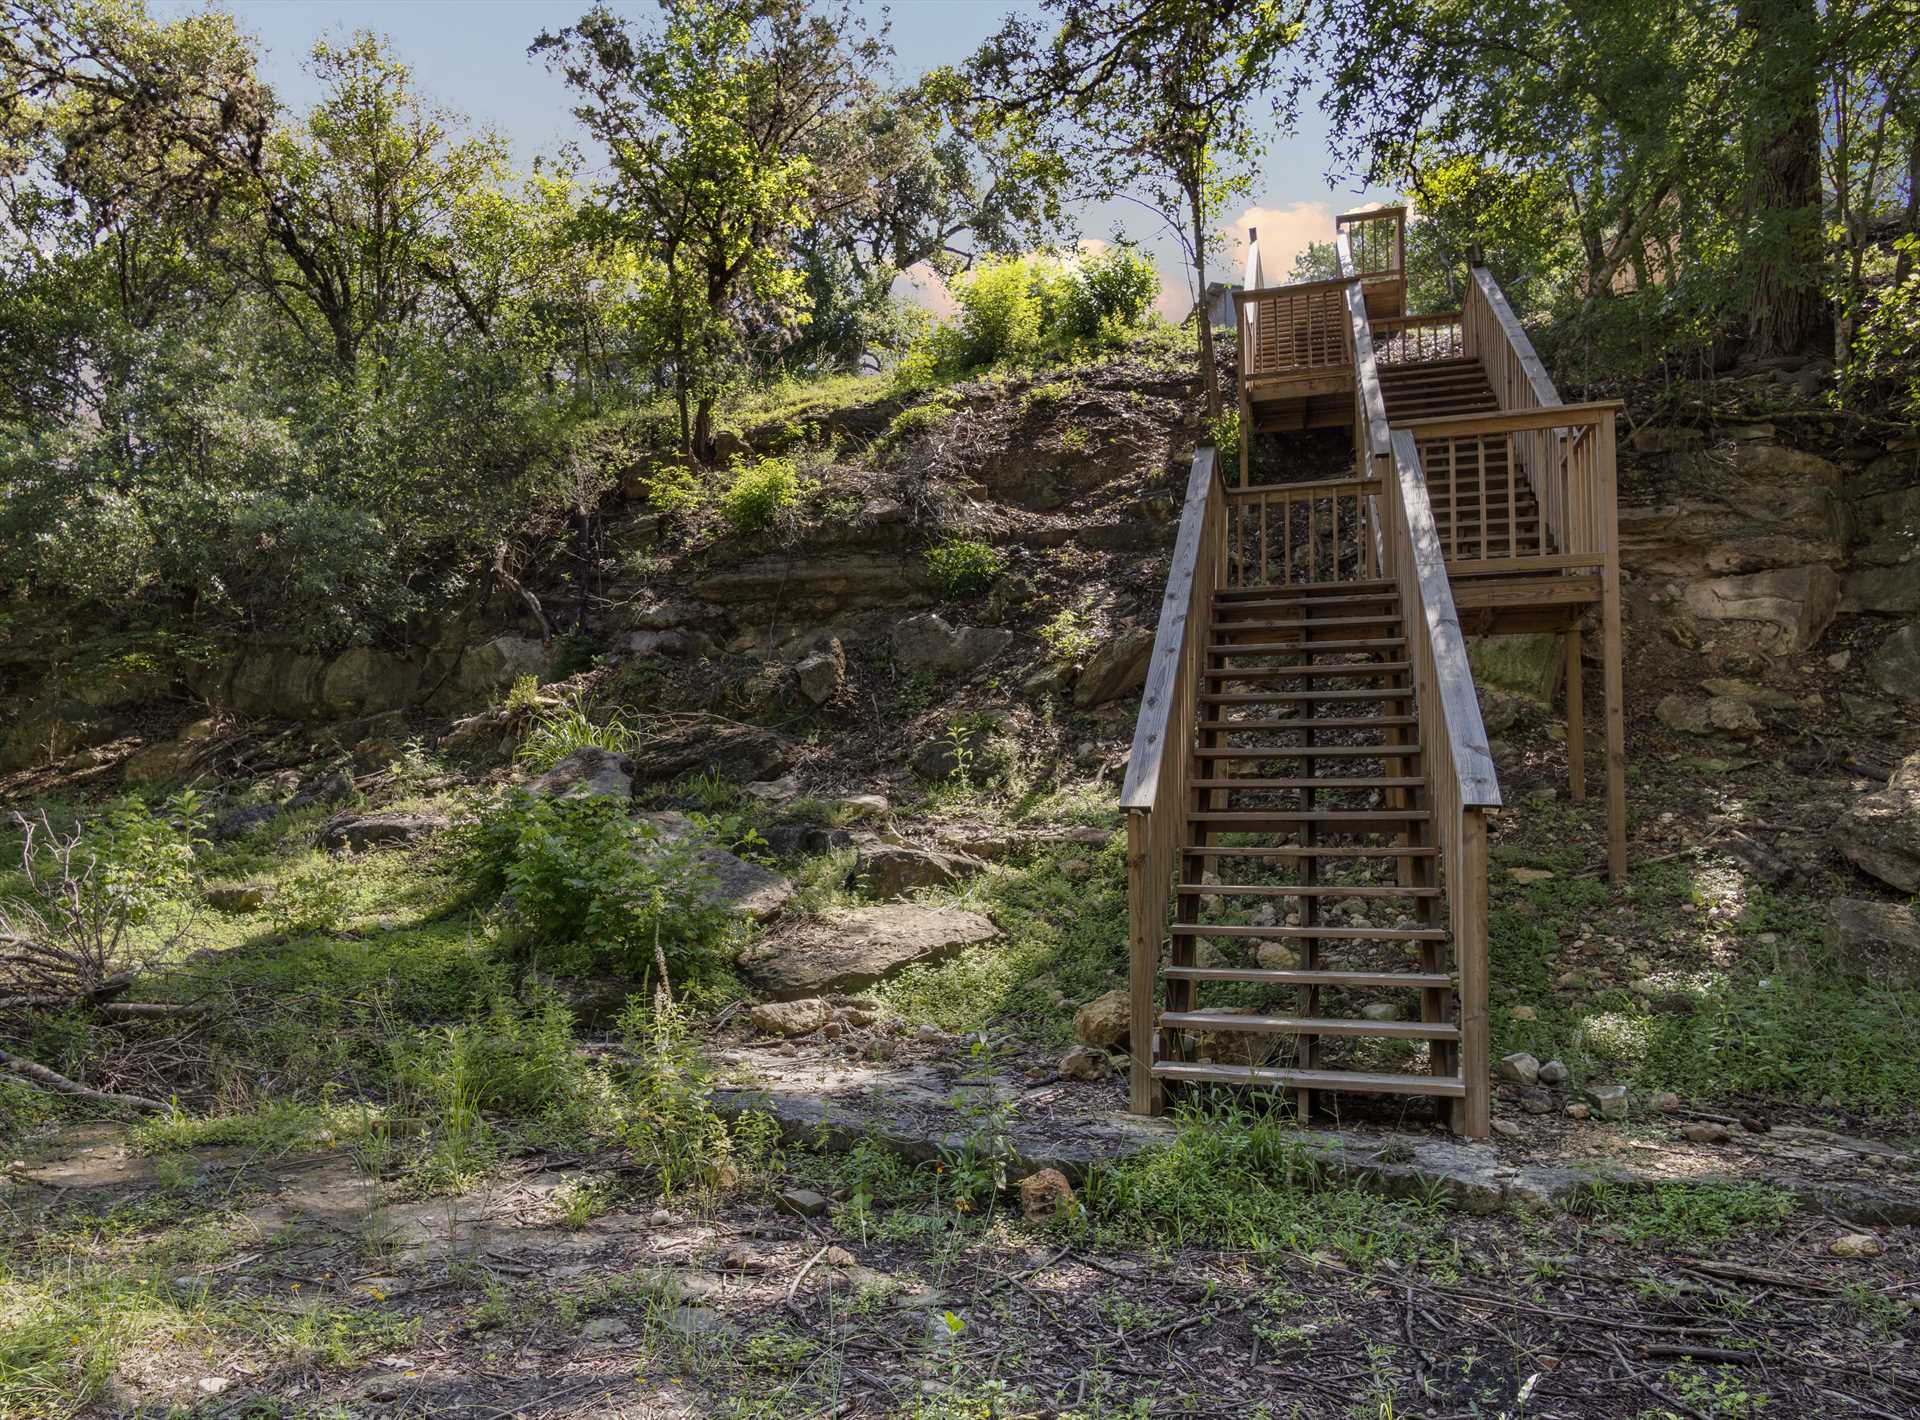                                                 A convenient staircase leads you right down to the Medina River! Please watch your footing, the stairs can be a little steep.